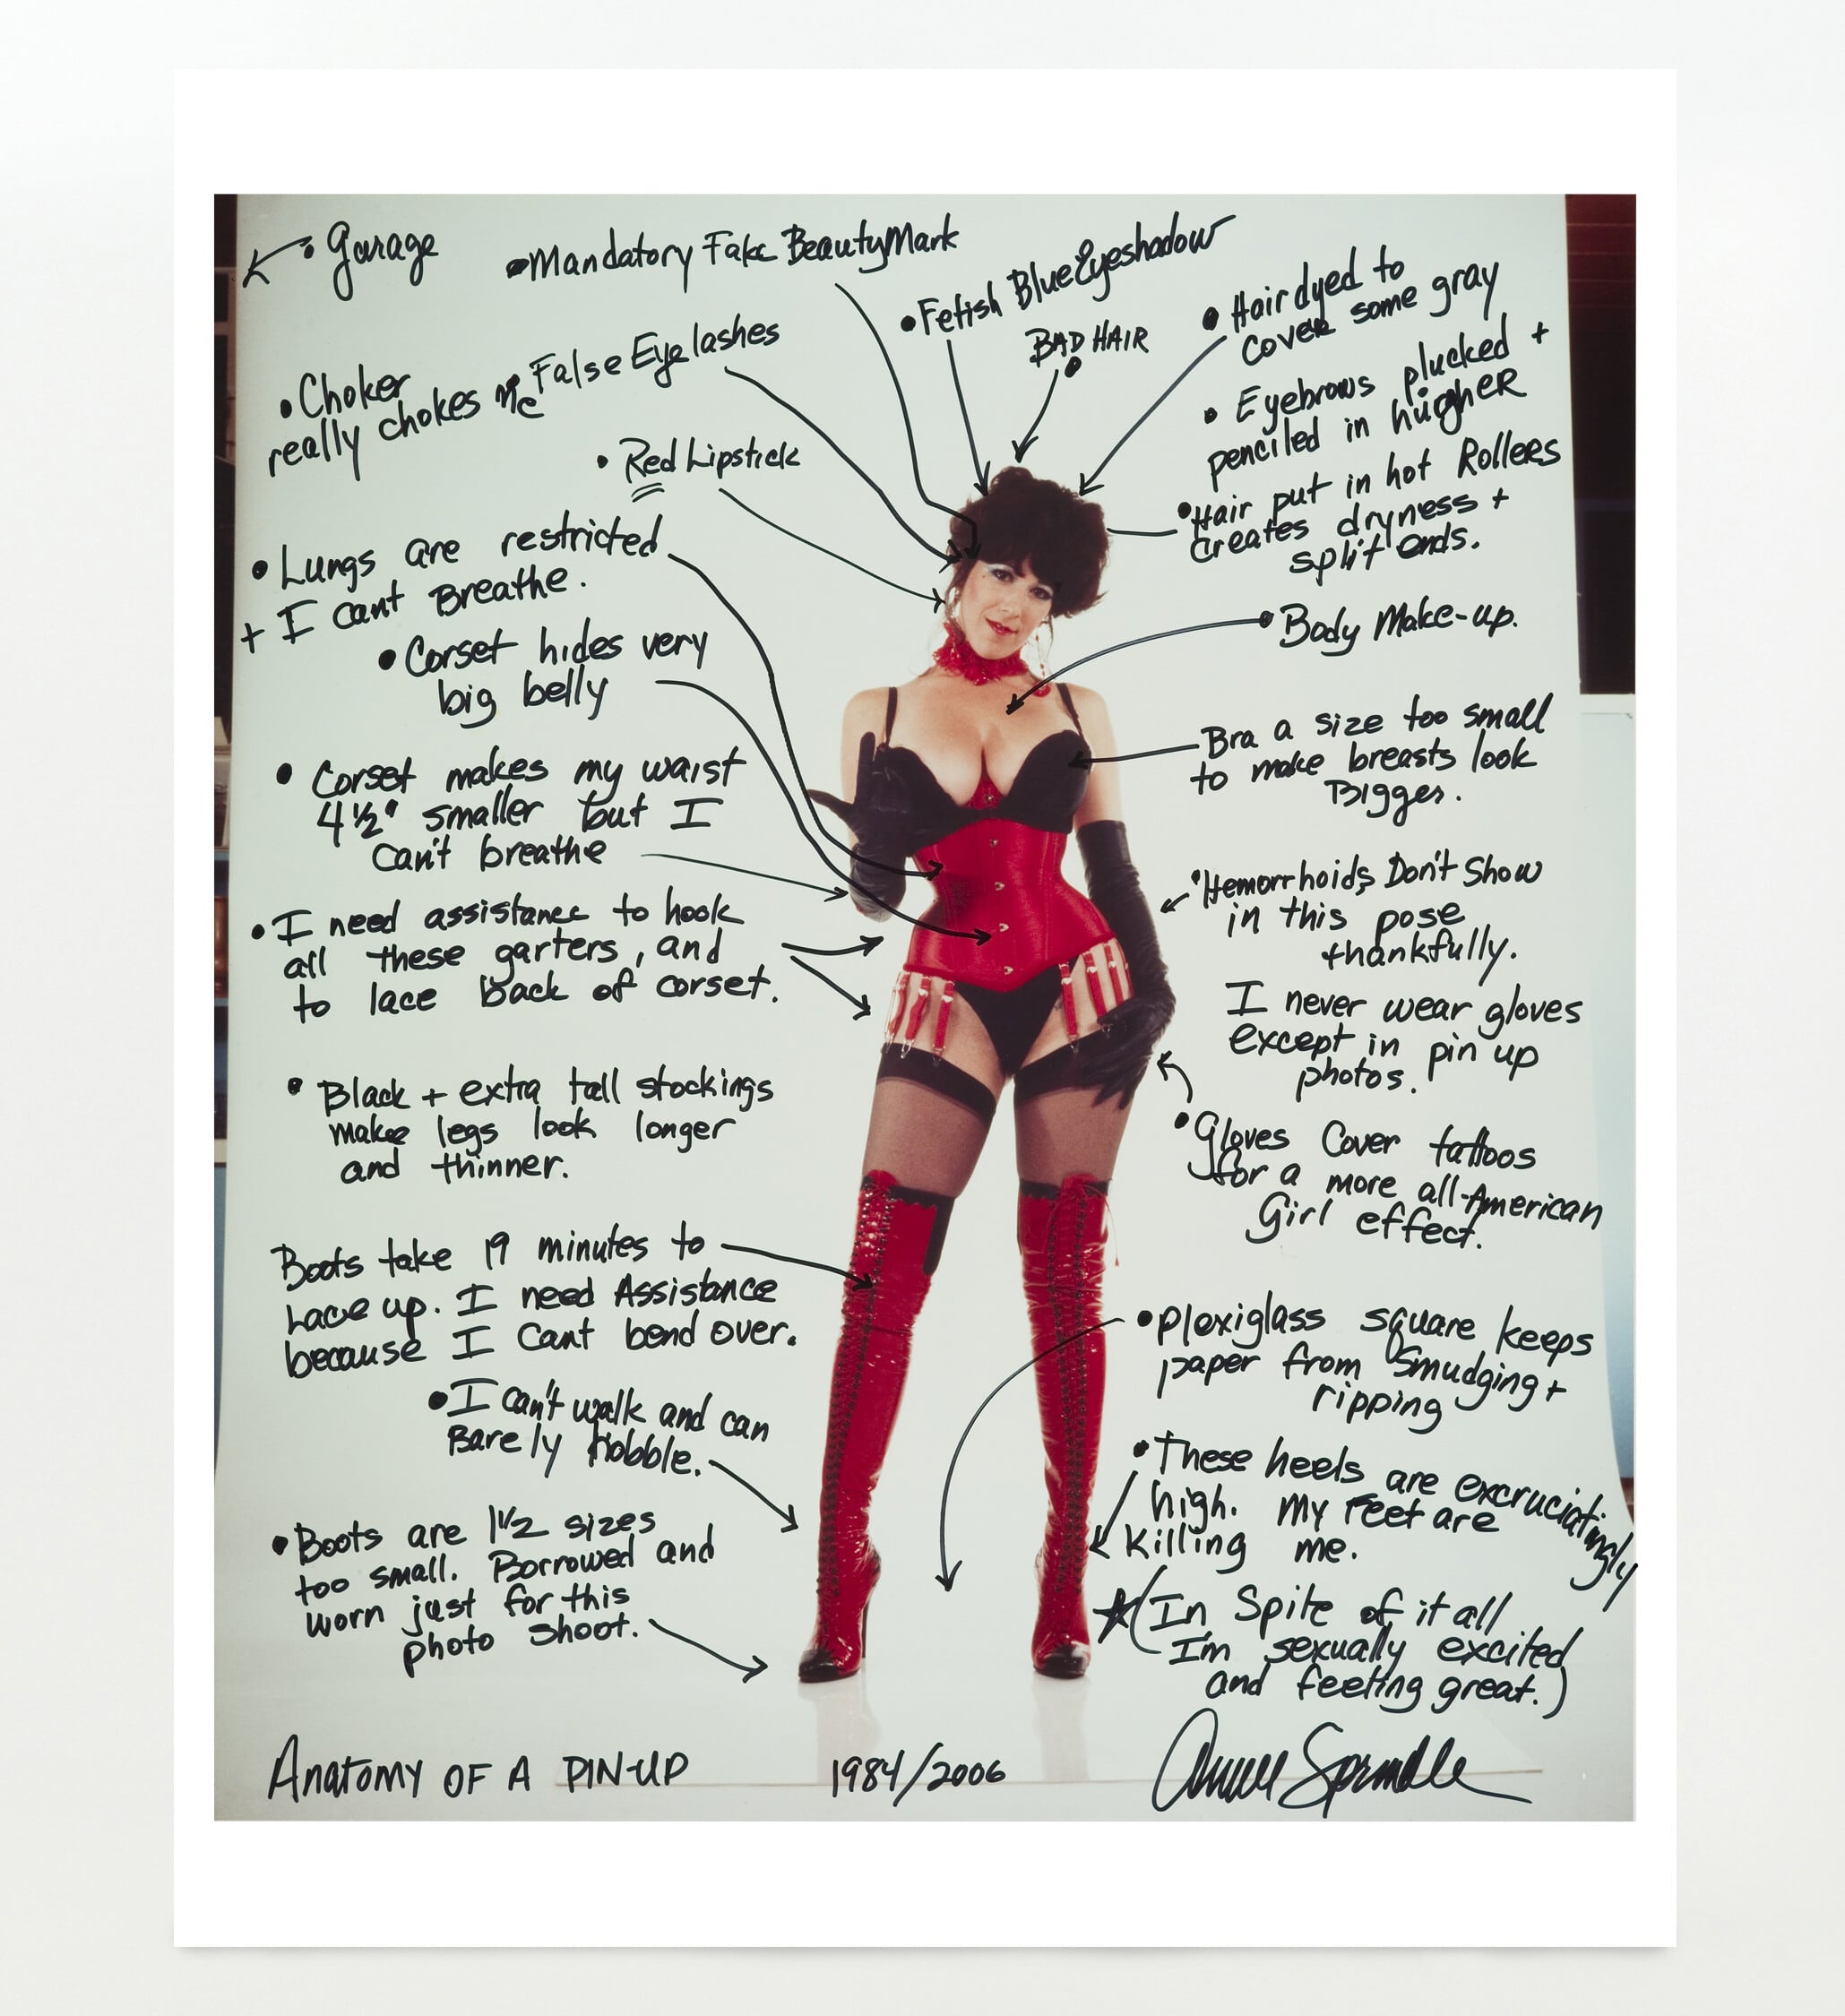 Annie Sprinkle, Anatomy of a 1980’s Pin Up (1984/2006), Images courtesy of the artist and Gavin Brown’s enterprise, New York / Rome. Photographer: Lance Brewer.